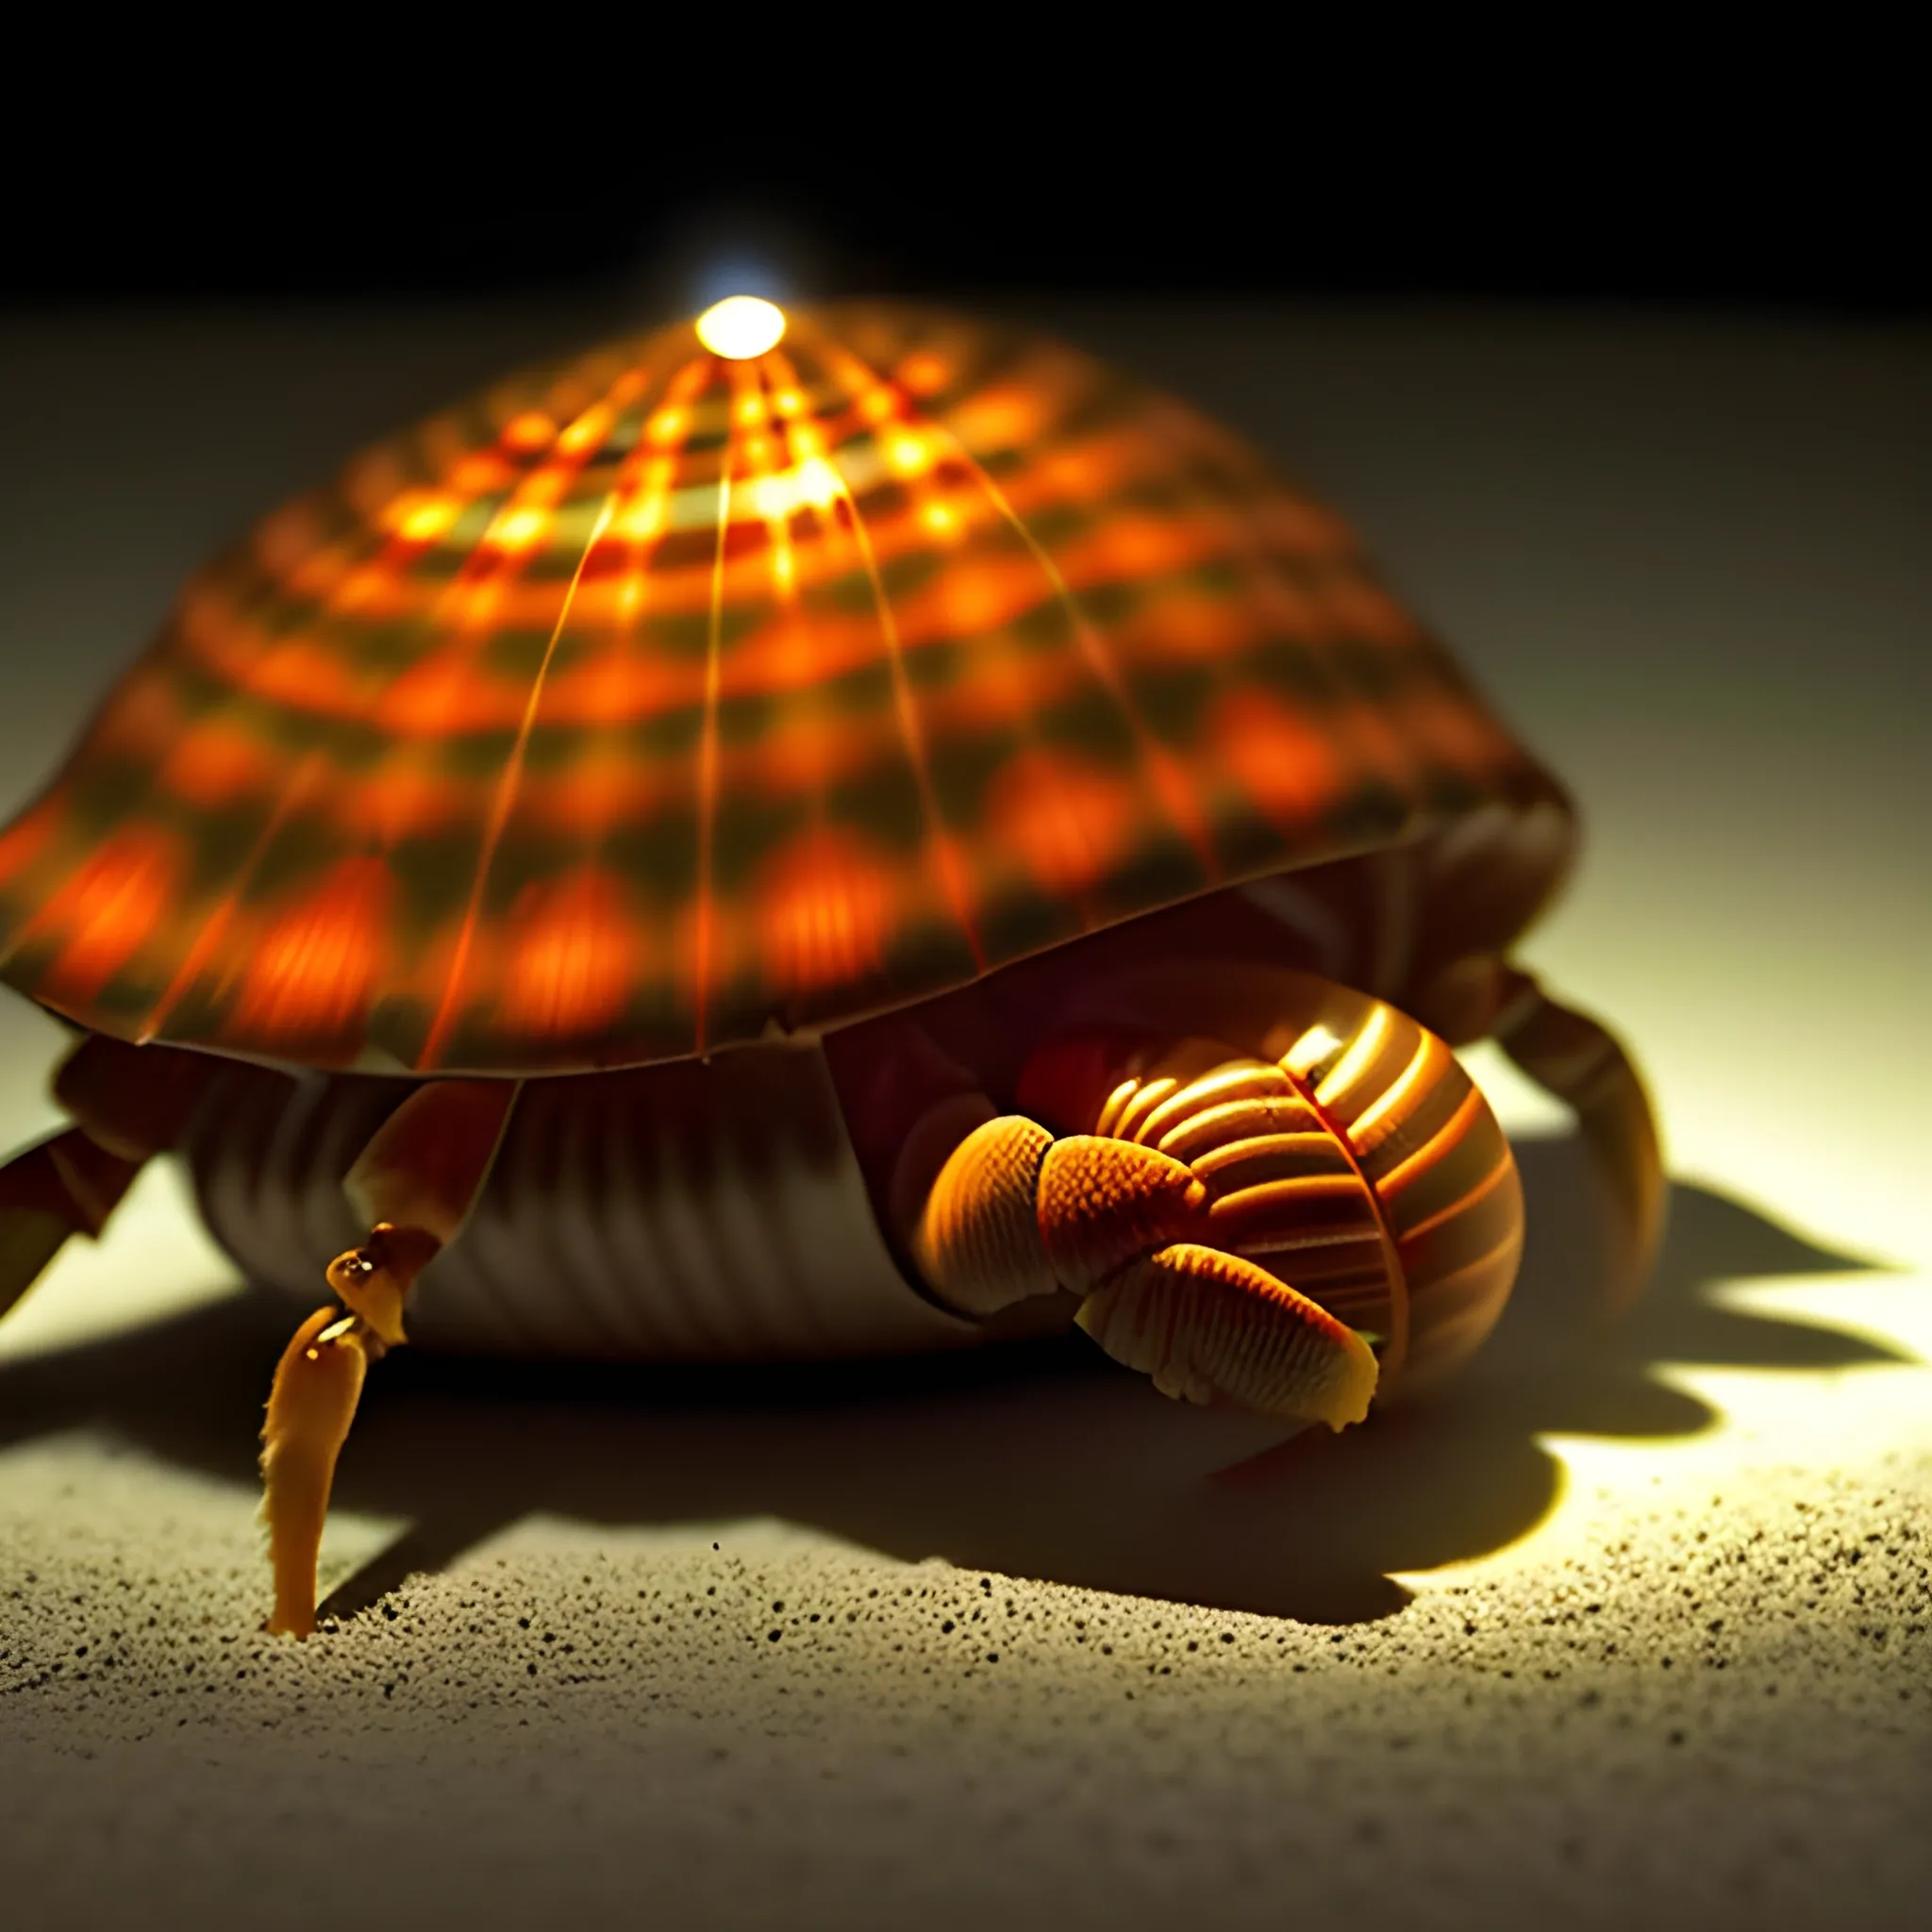 nighttime footage of a hermit crab using an incandescent light-bulb as its shell, Trippy